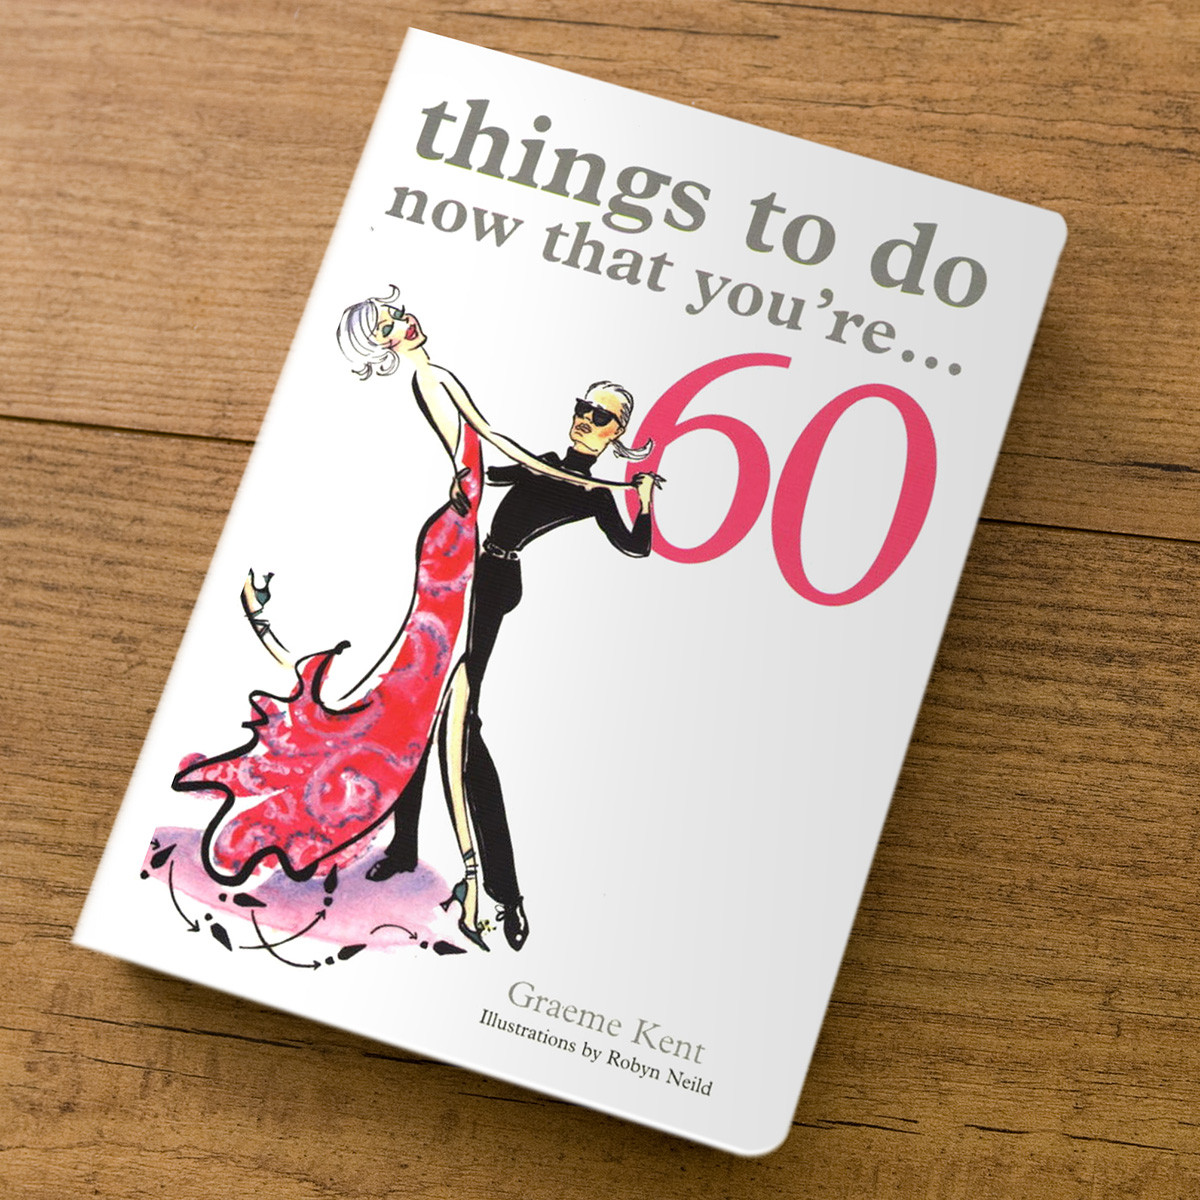 Gift Ideas For 60 Year Old Woman
 Things To Do Now That You re 60 Gift Book 60th